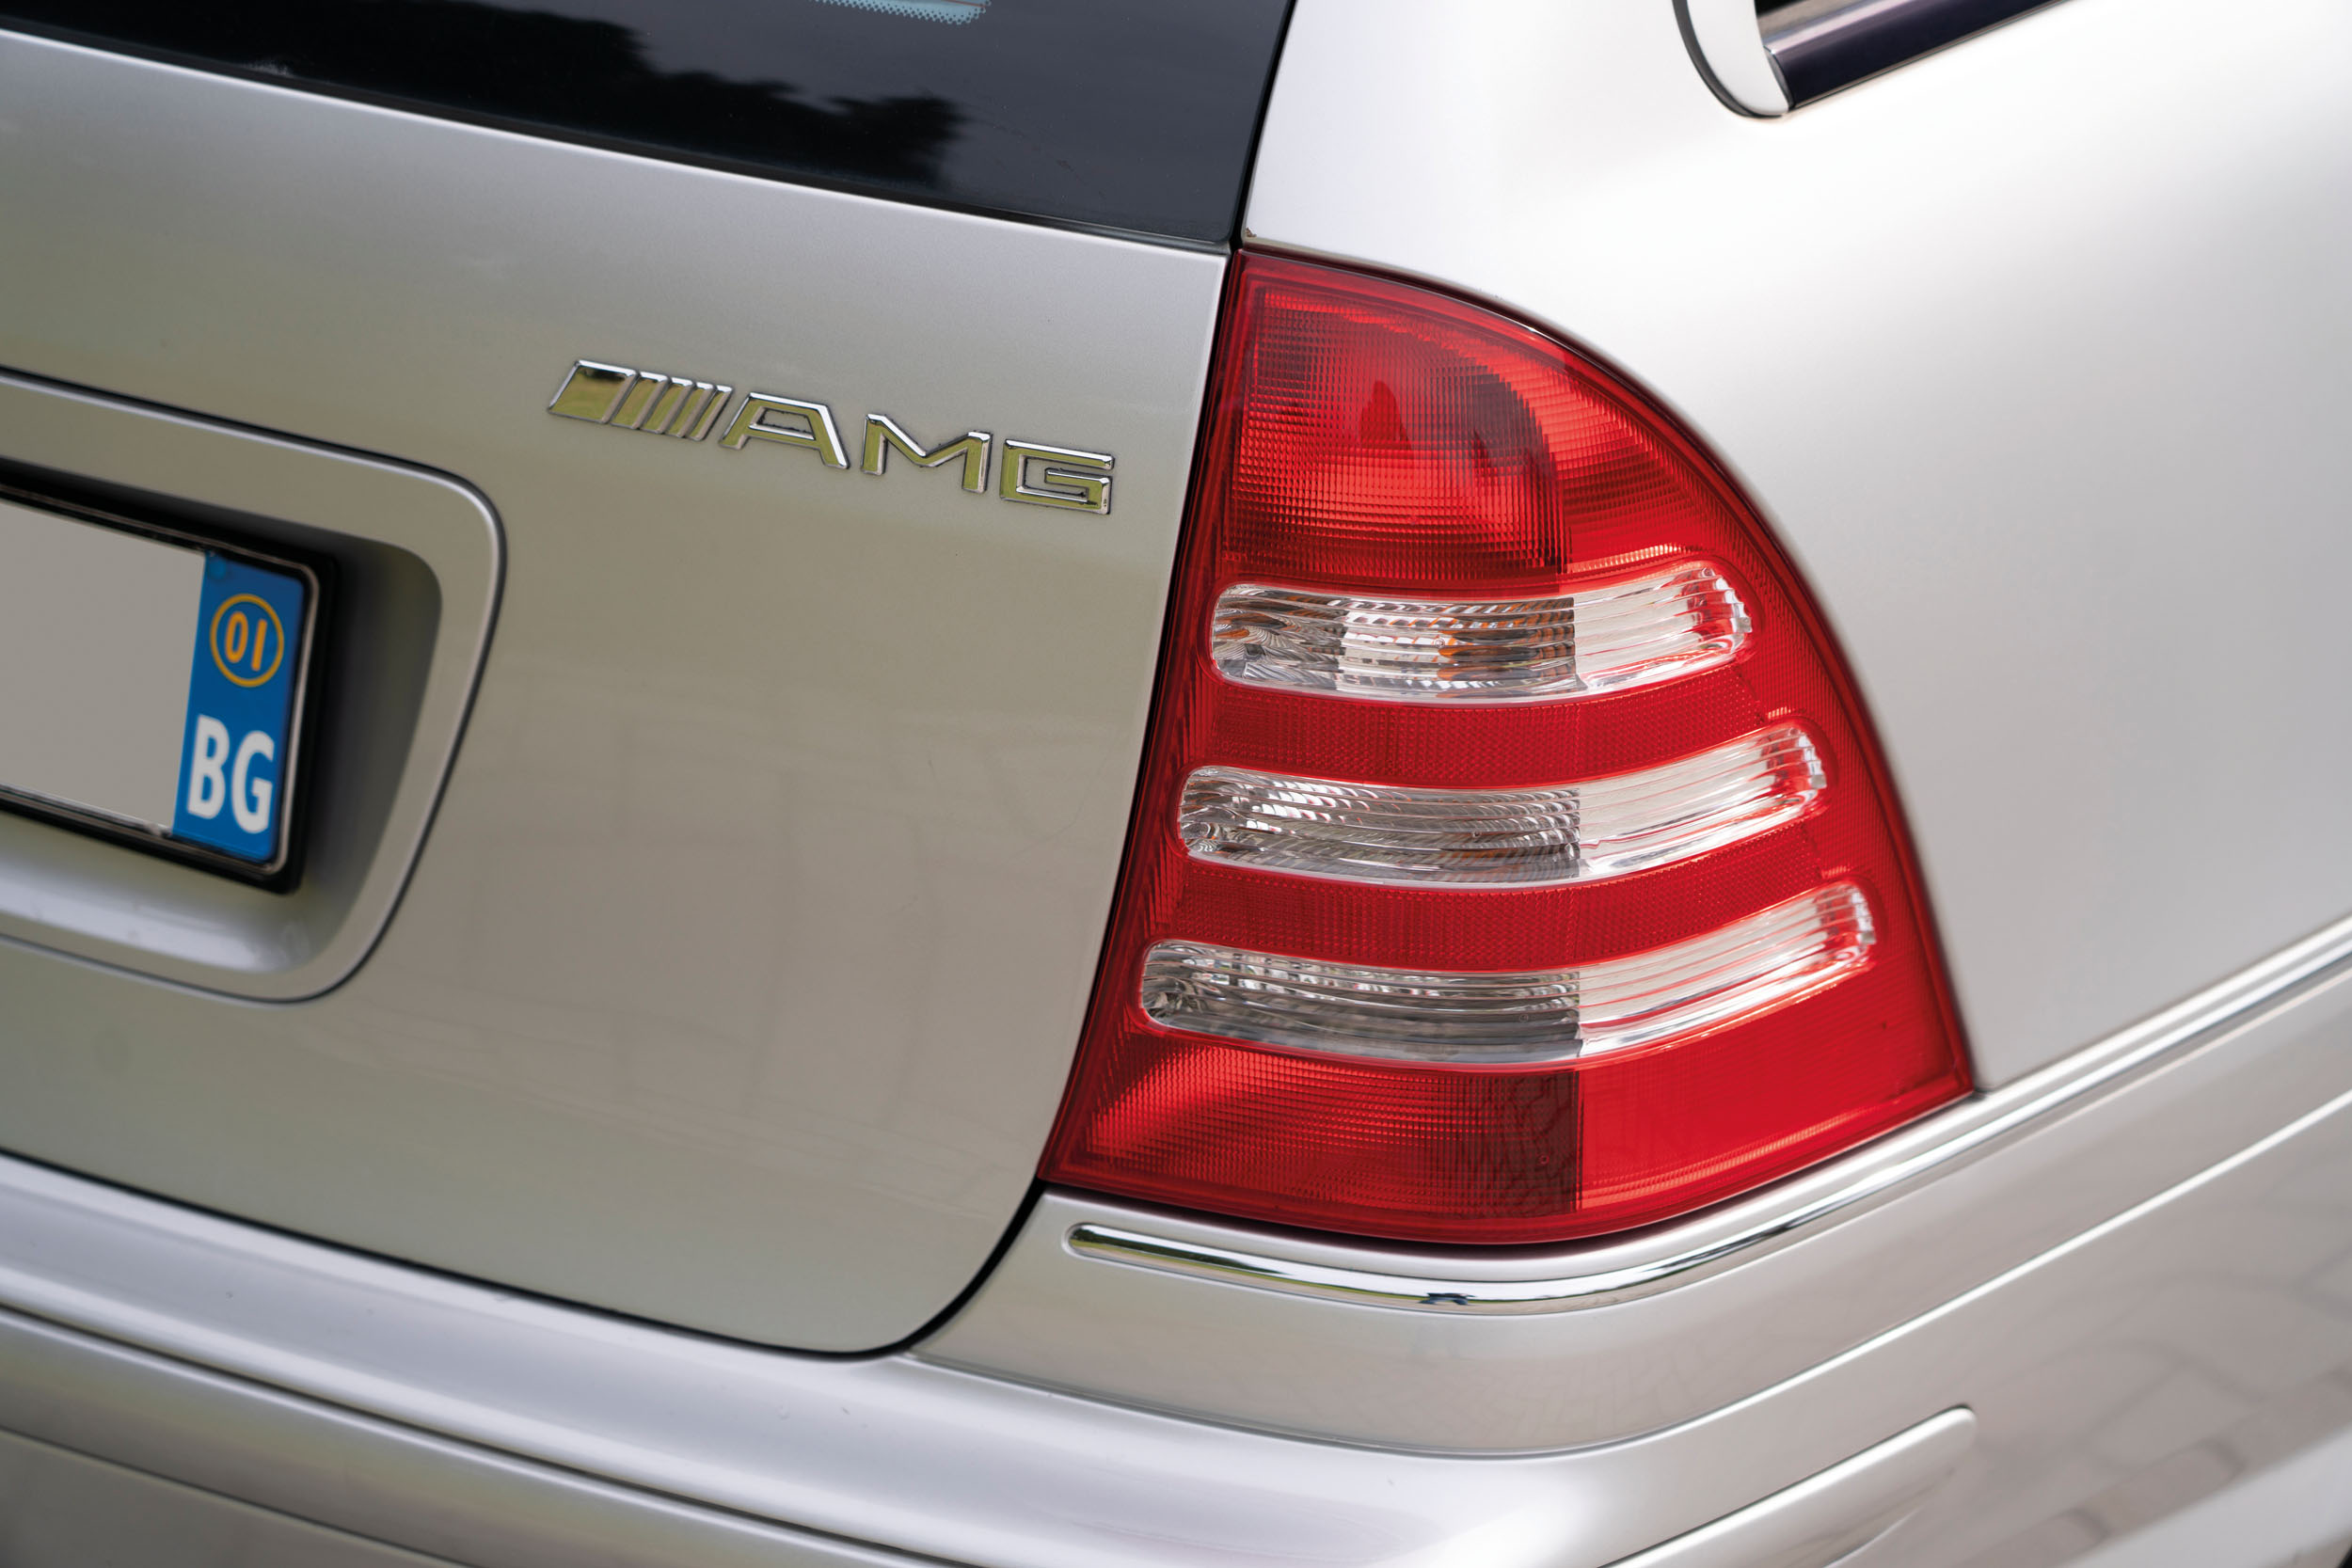 2001 MERCEDES-BENZ C32 T AMG (W203) - Image 4 of 6